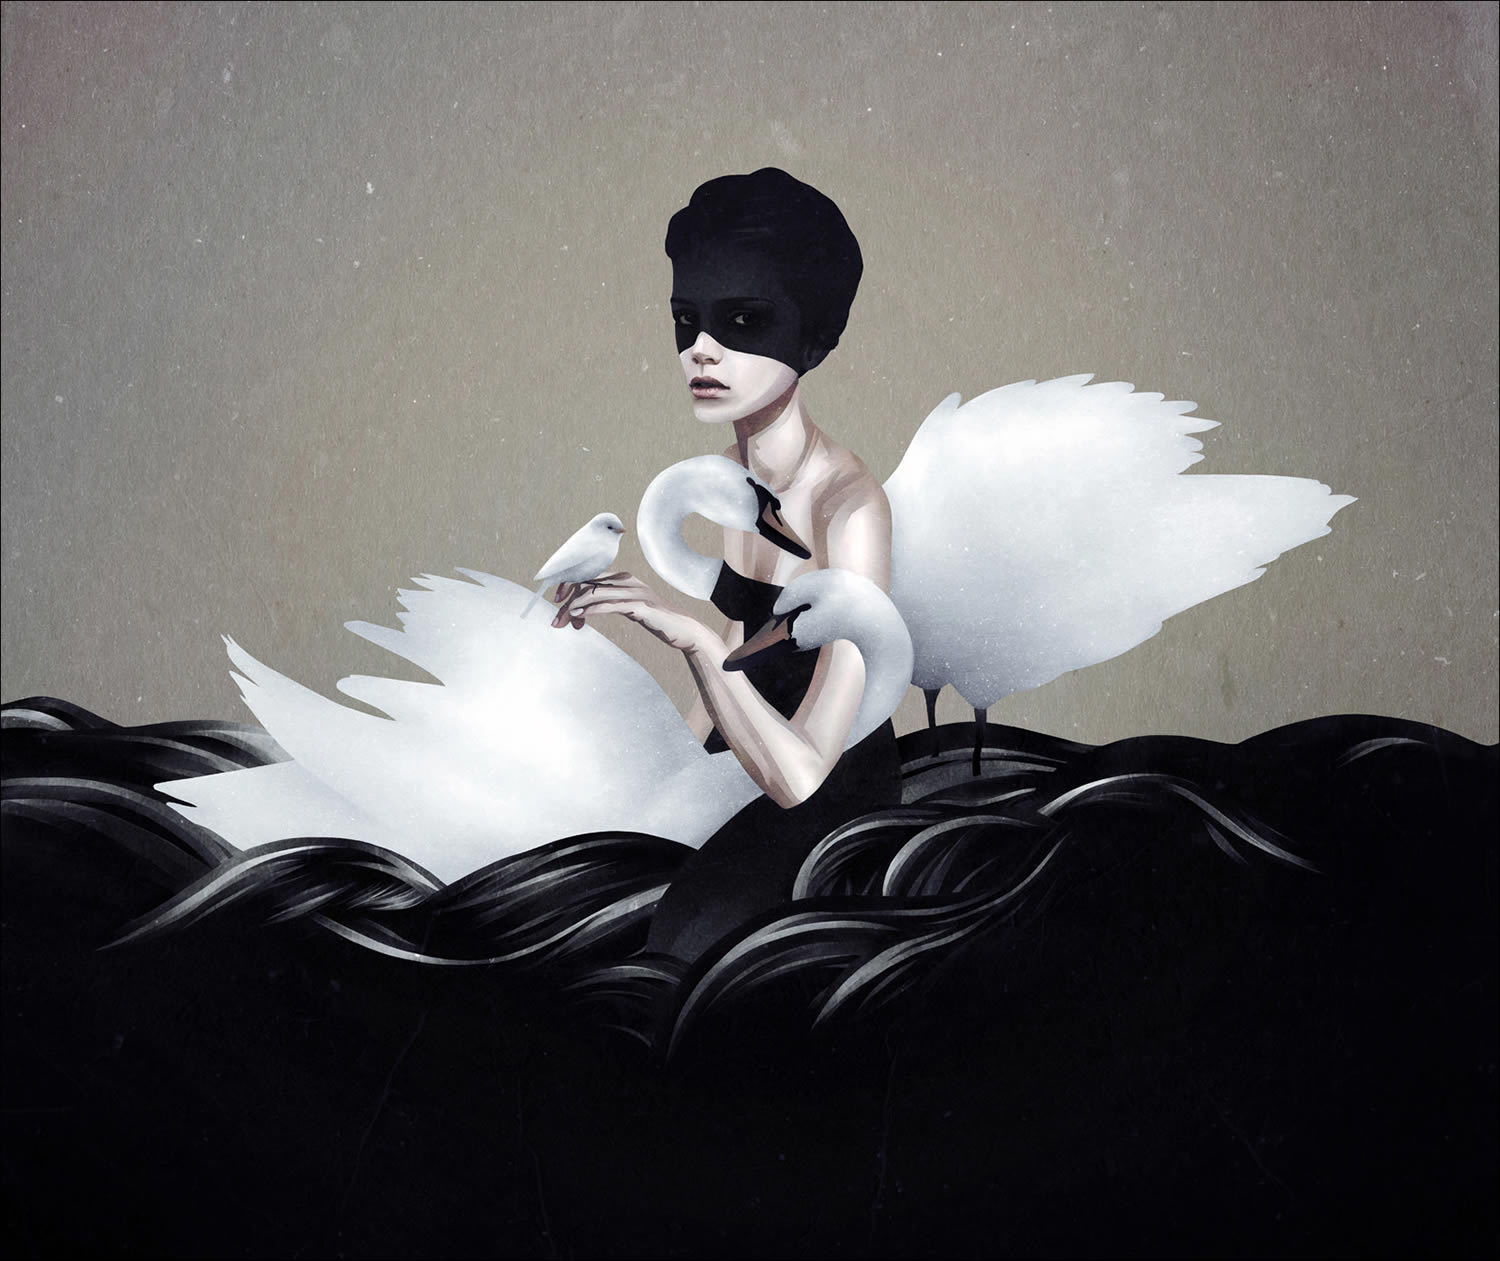 swans with girl, illustration by ruben ireland